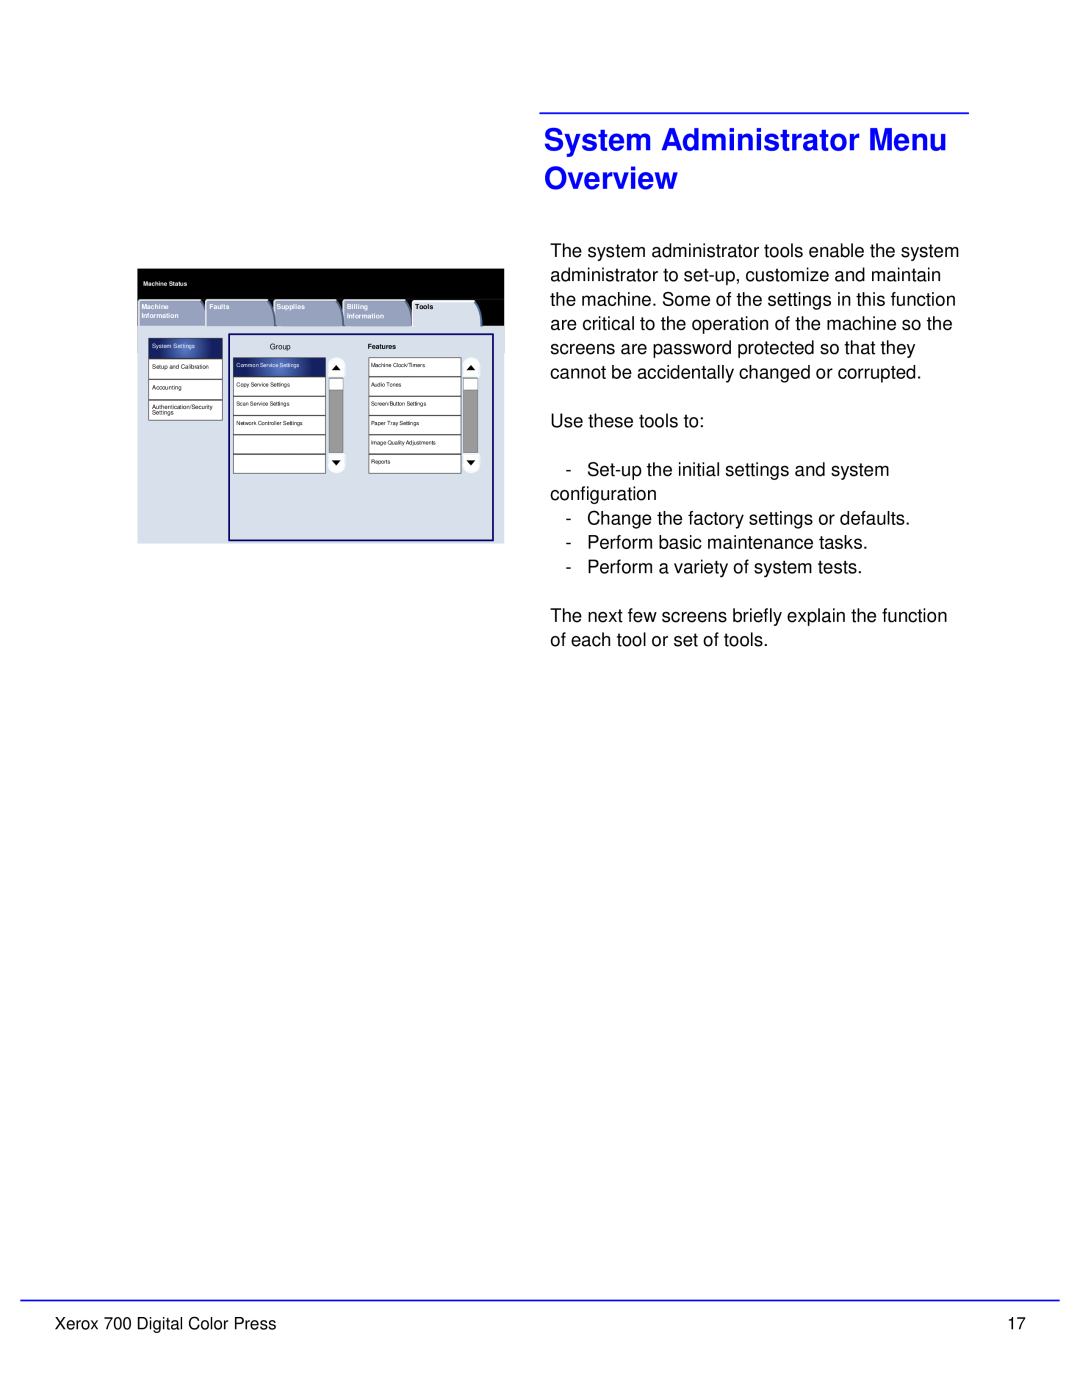 Xerox 700 quick start System Administrator Menu Overview 